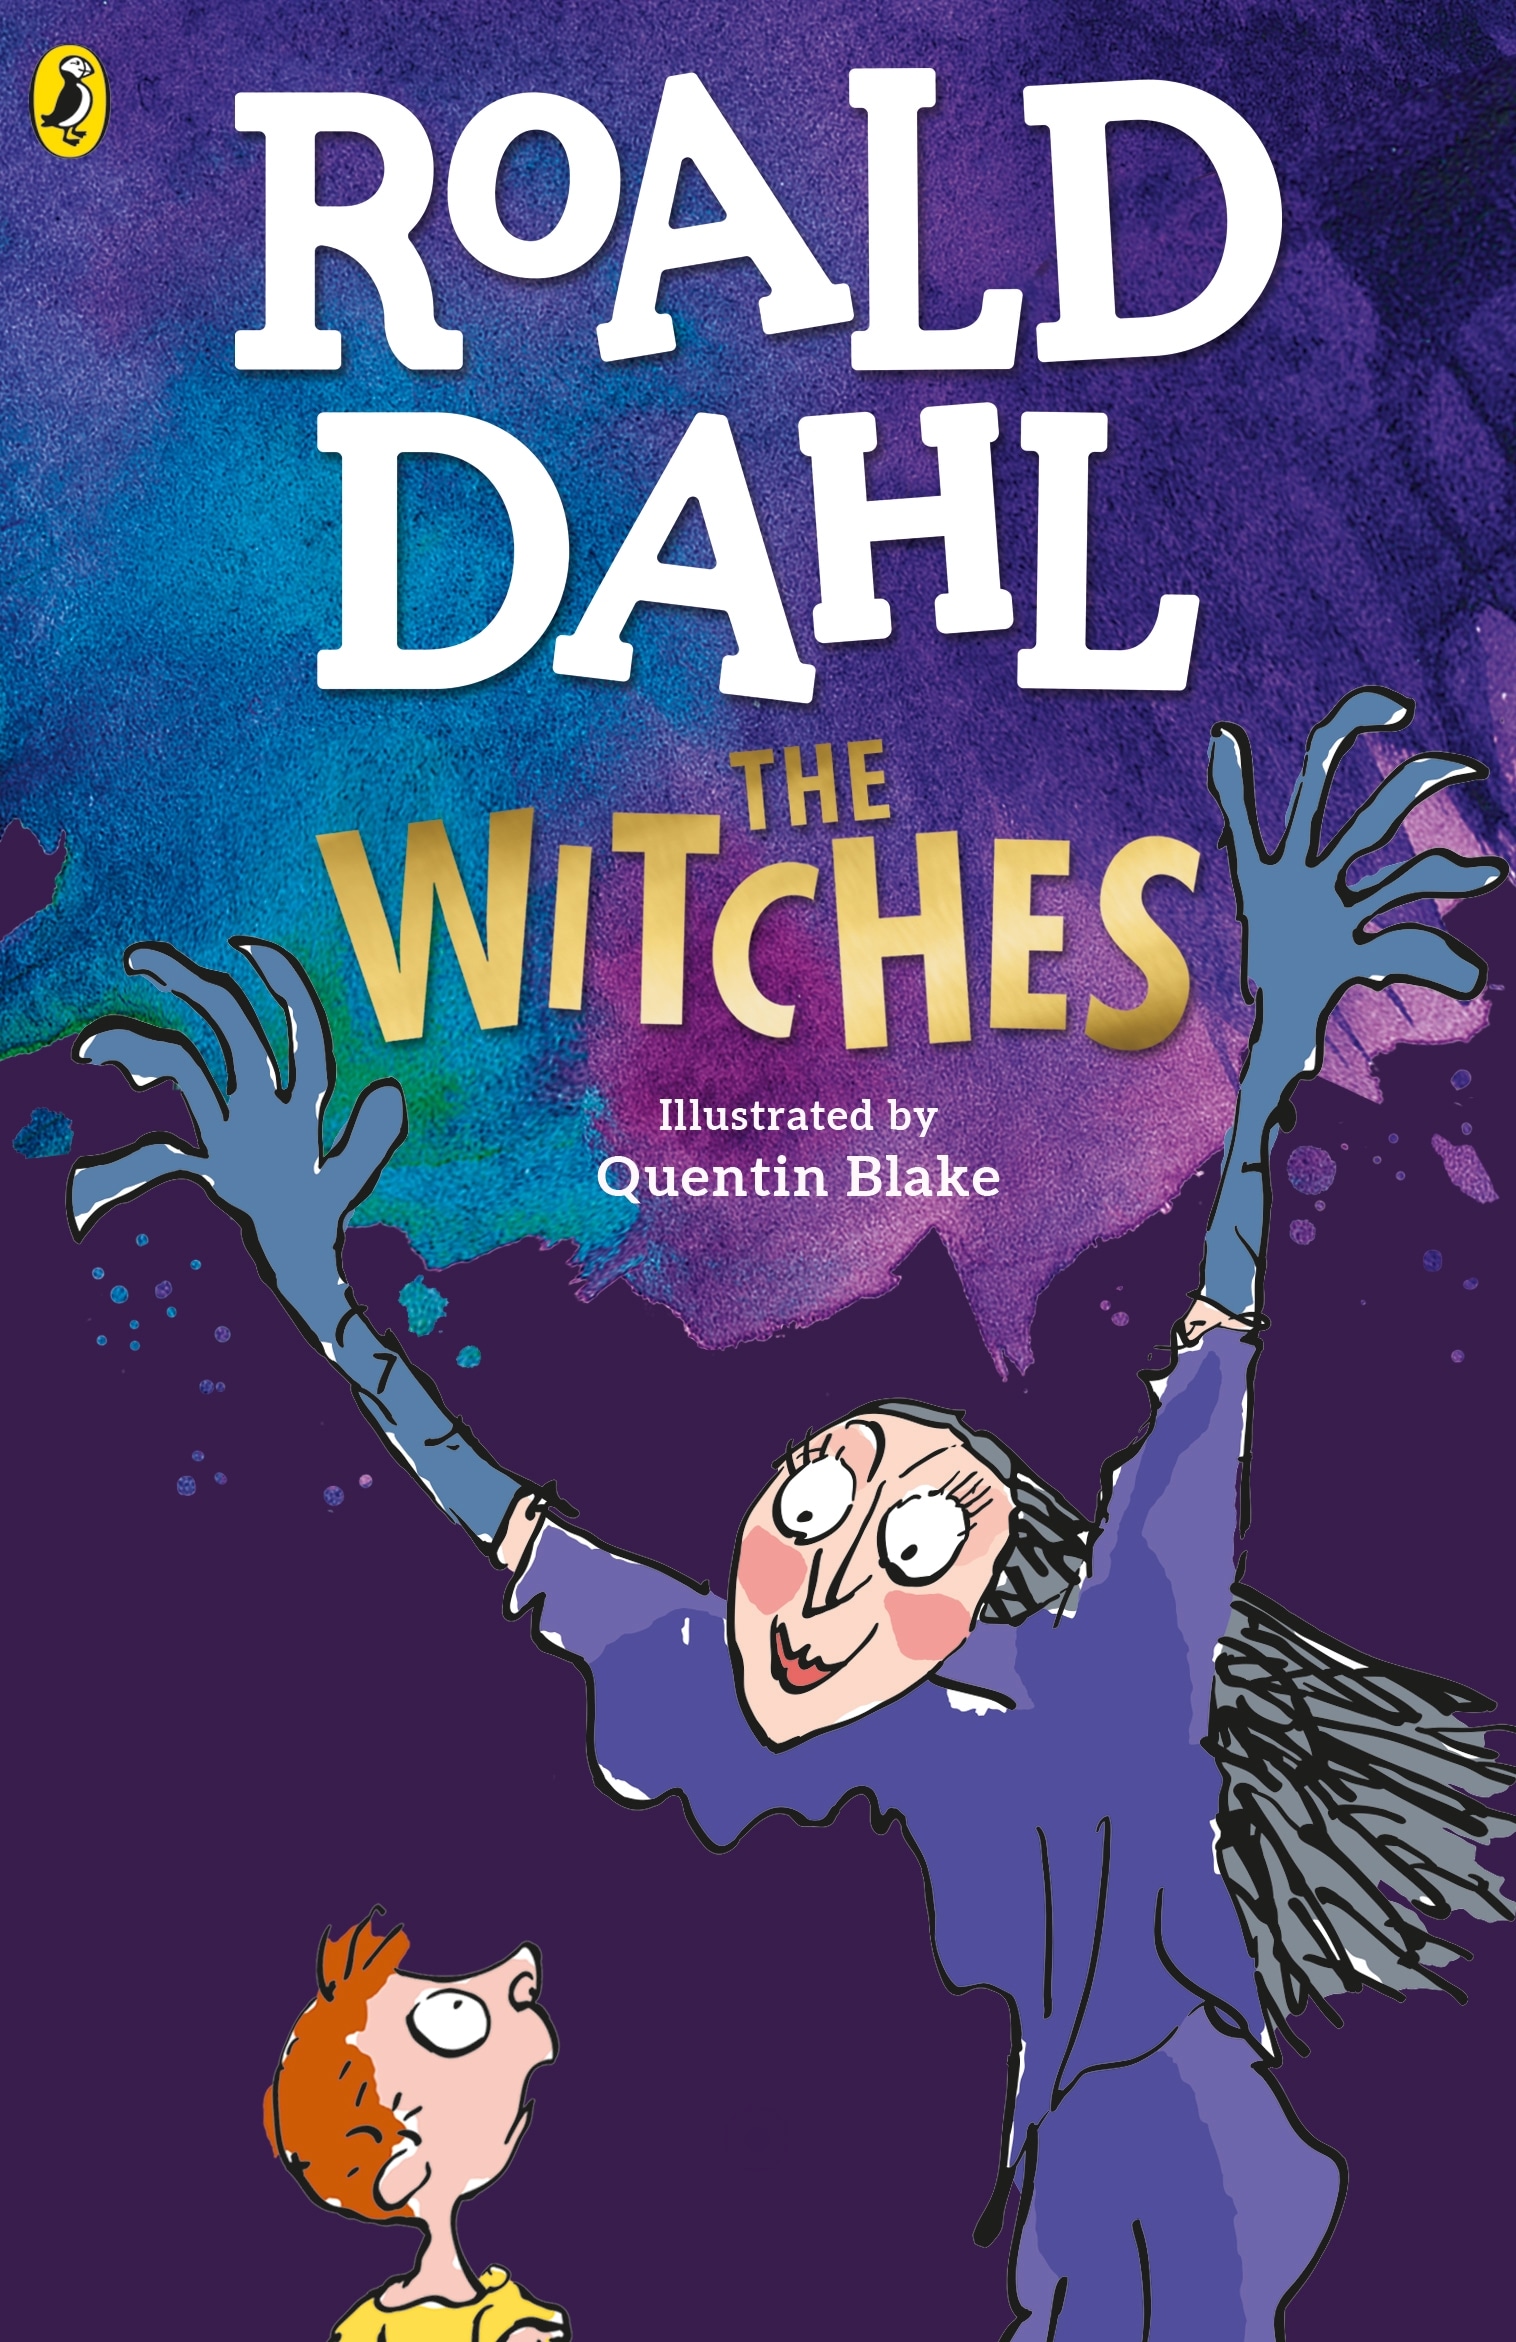 Book “The Witches” by Roald Dahl — July 21, 2022